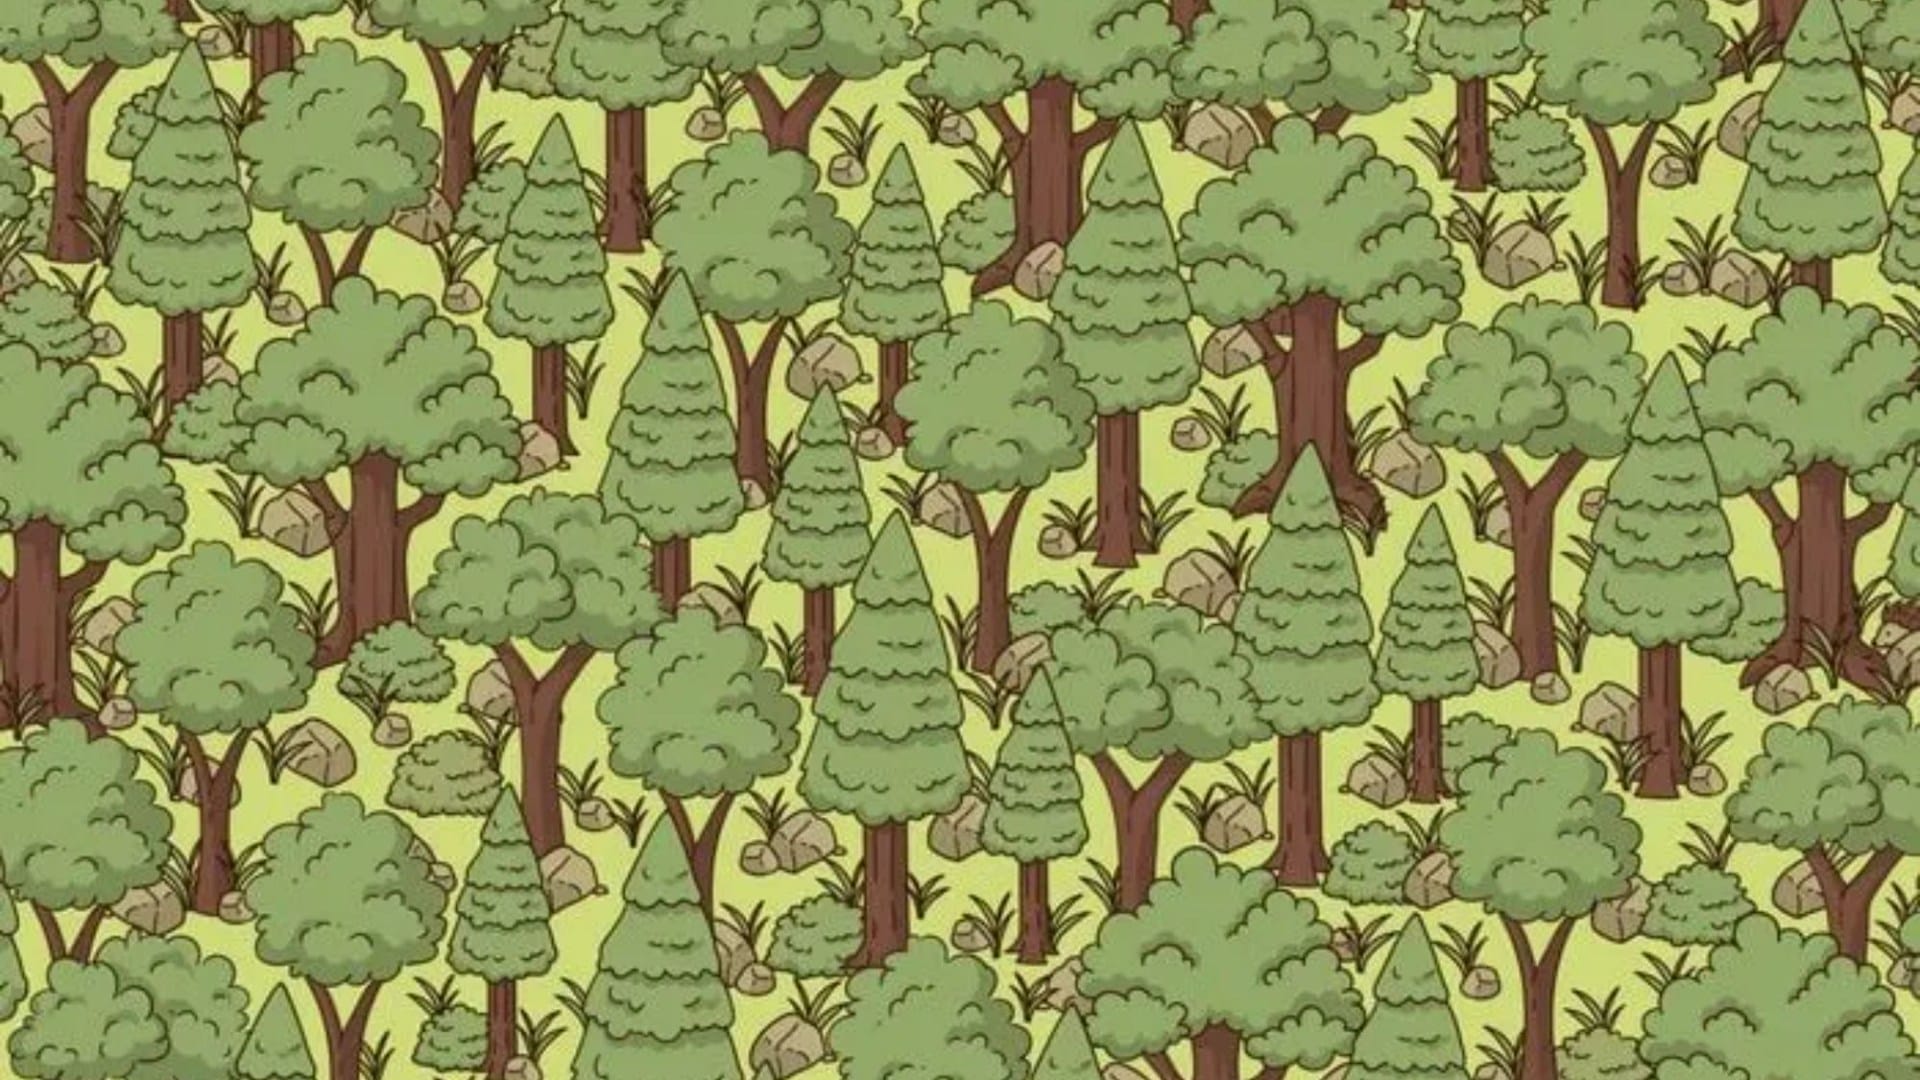 You have razor-sharp vision if you spot the hedgehog in the trees in this mind-twisting optical illusion in 12 seconds